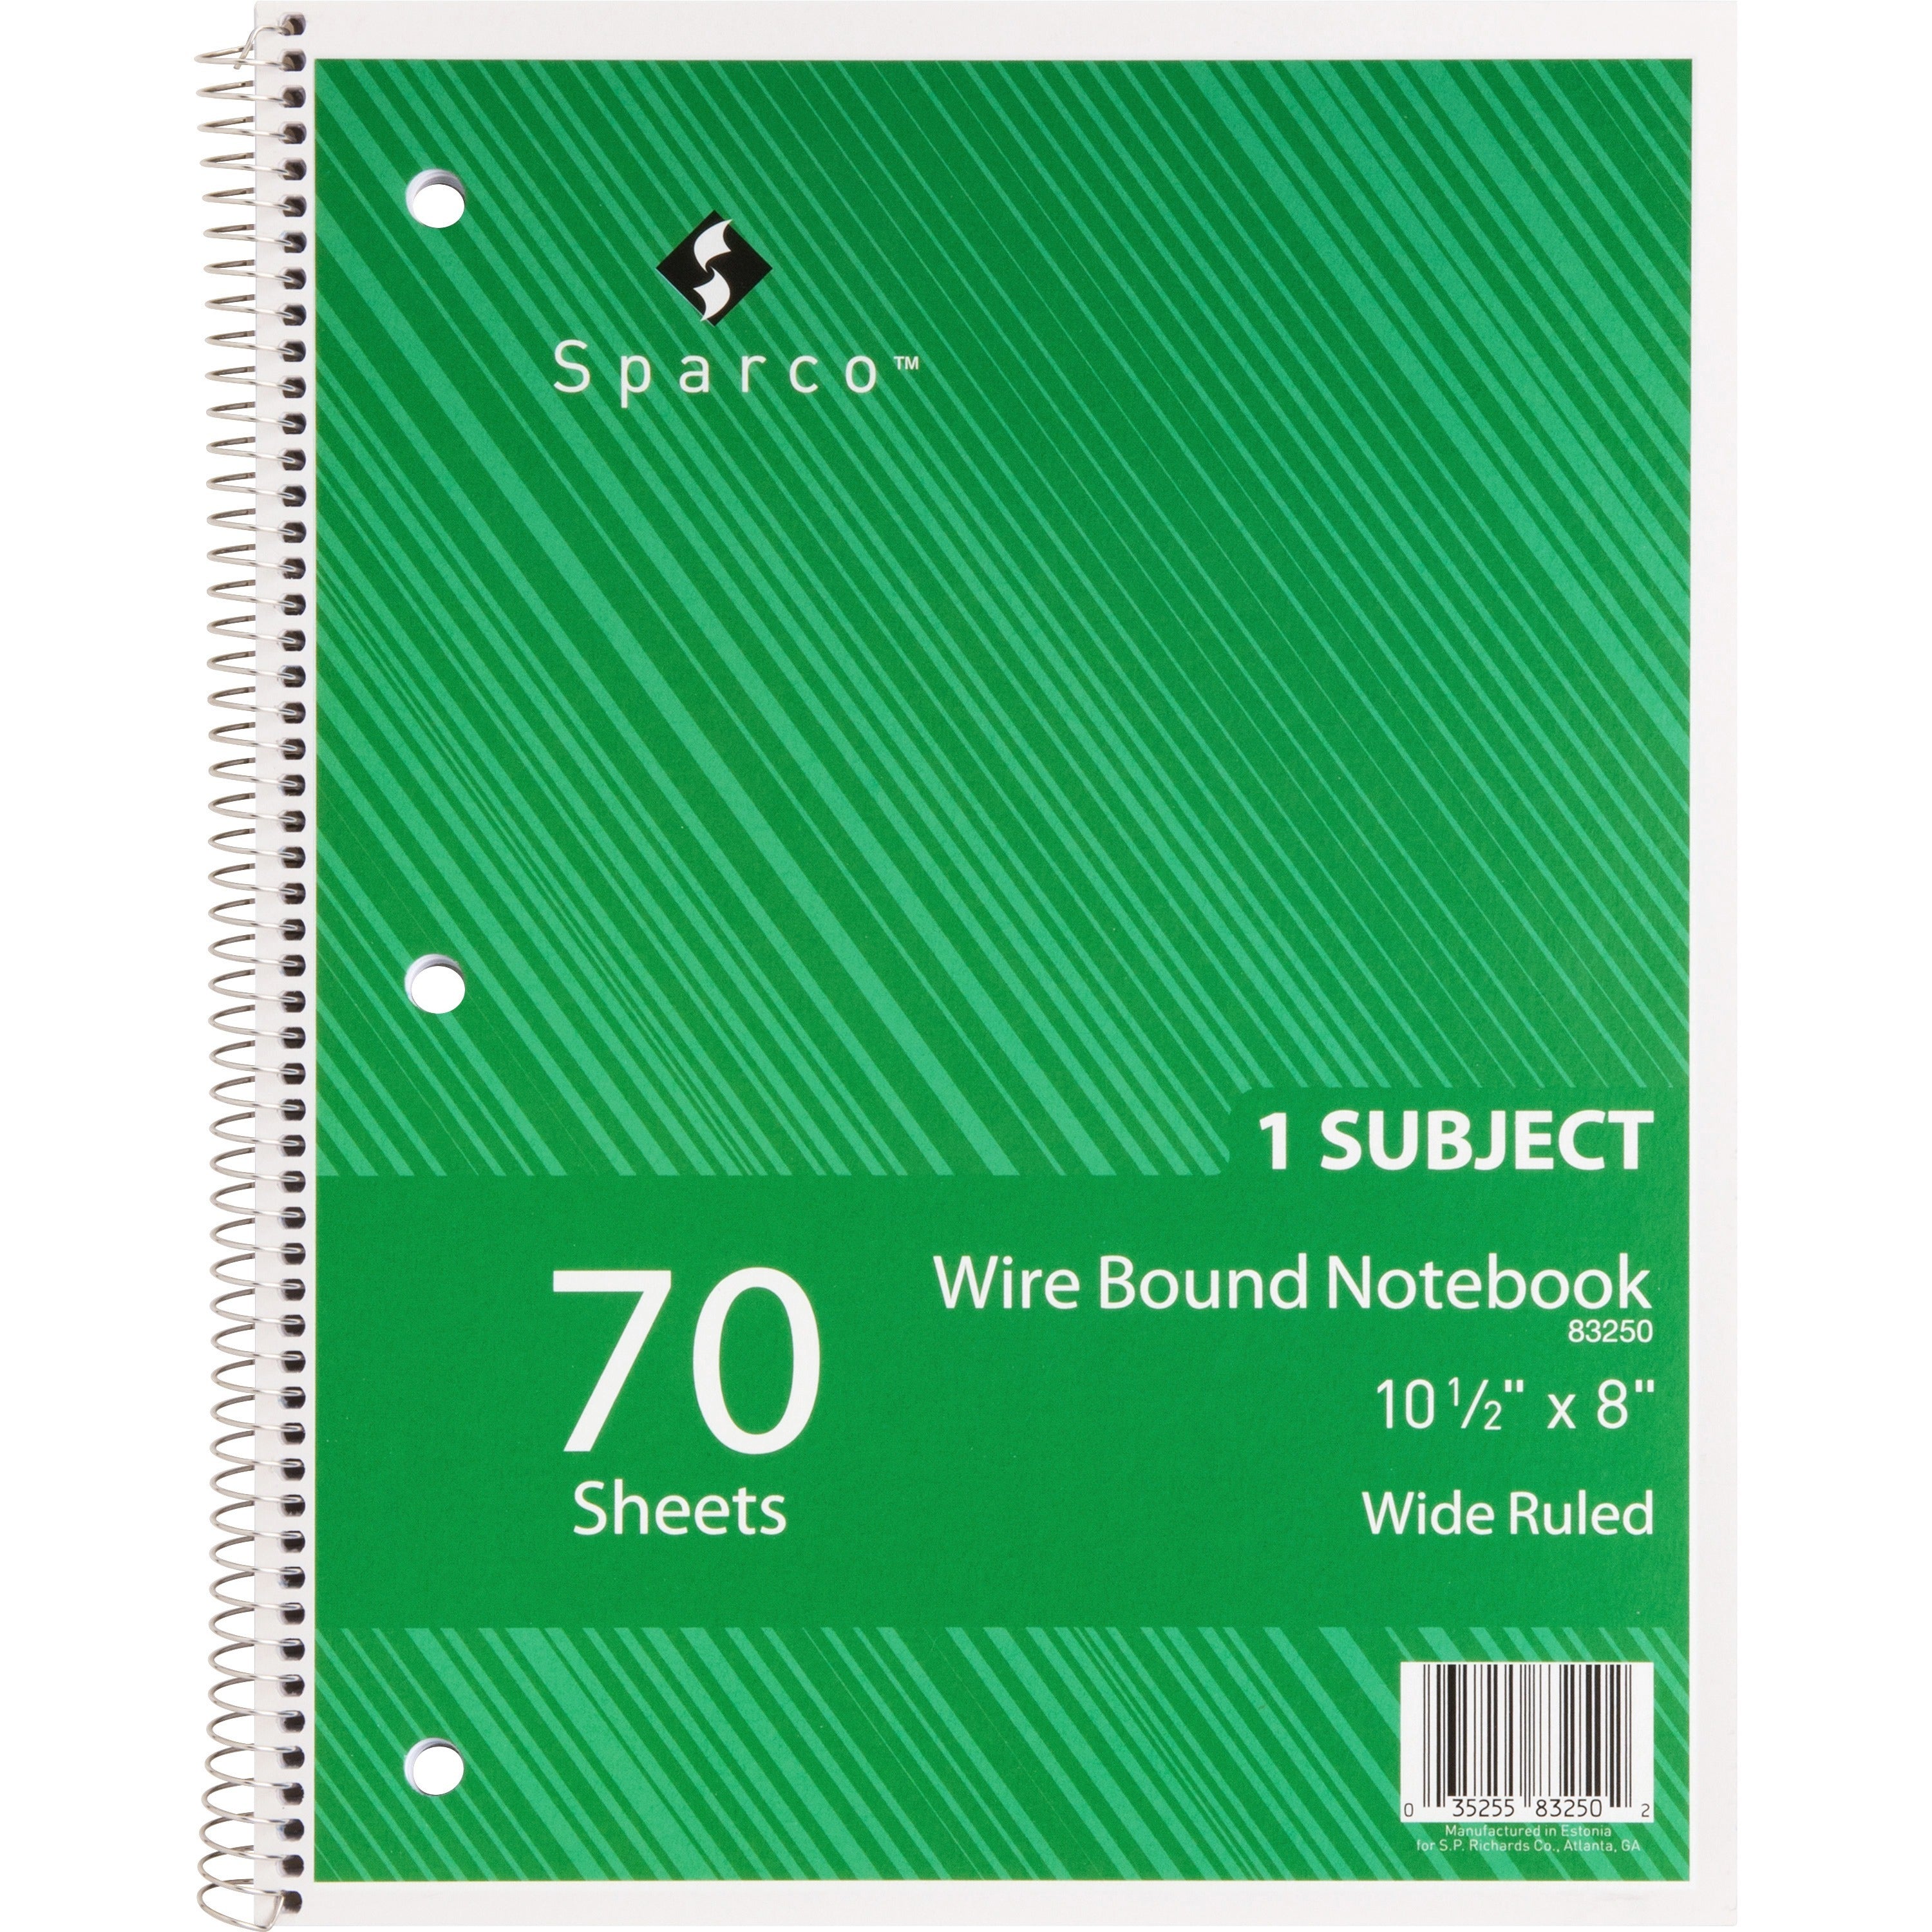 Sparco Quality 3HP Notebook - 1 Subject(s) - 70 Sheets - Wire Bound - Wide Ruled - Unruled Margin - 16 lb Basis Weight - 8" x 10 1/2" - Bright White Paper - AssortedChipboard Cover - Bleed Resistant, Stiff-cover - 1 Each - 